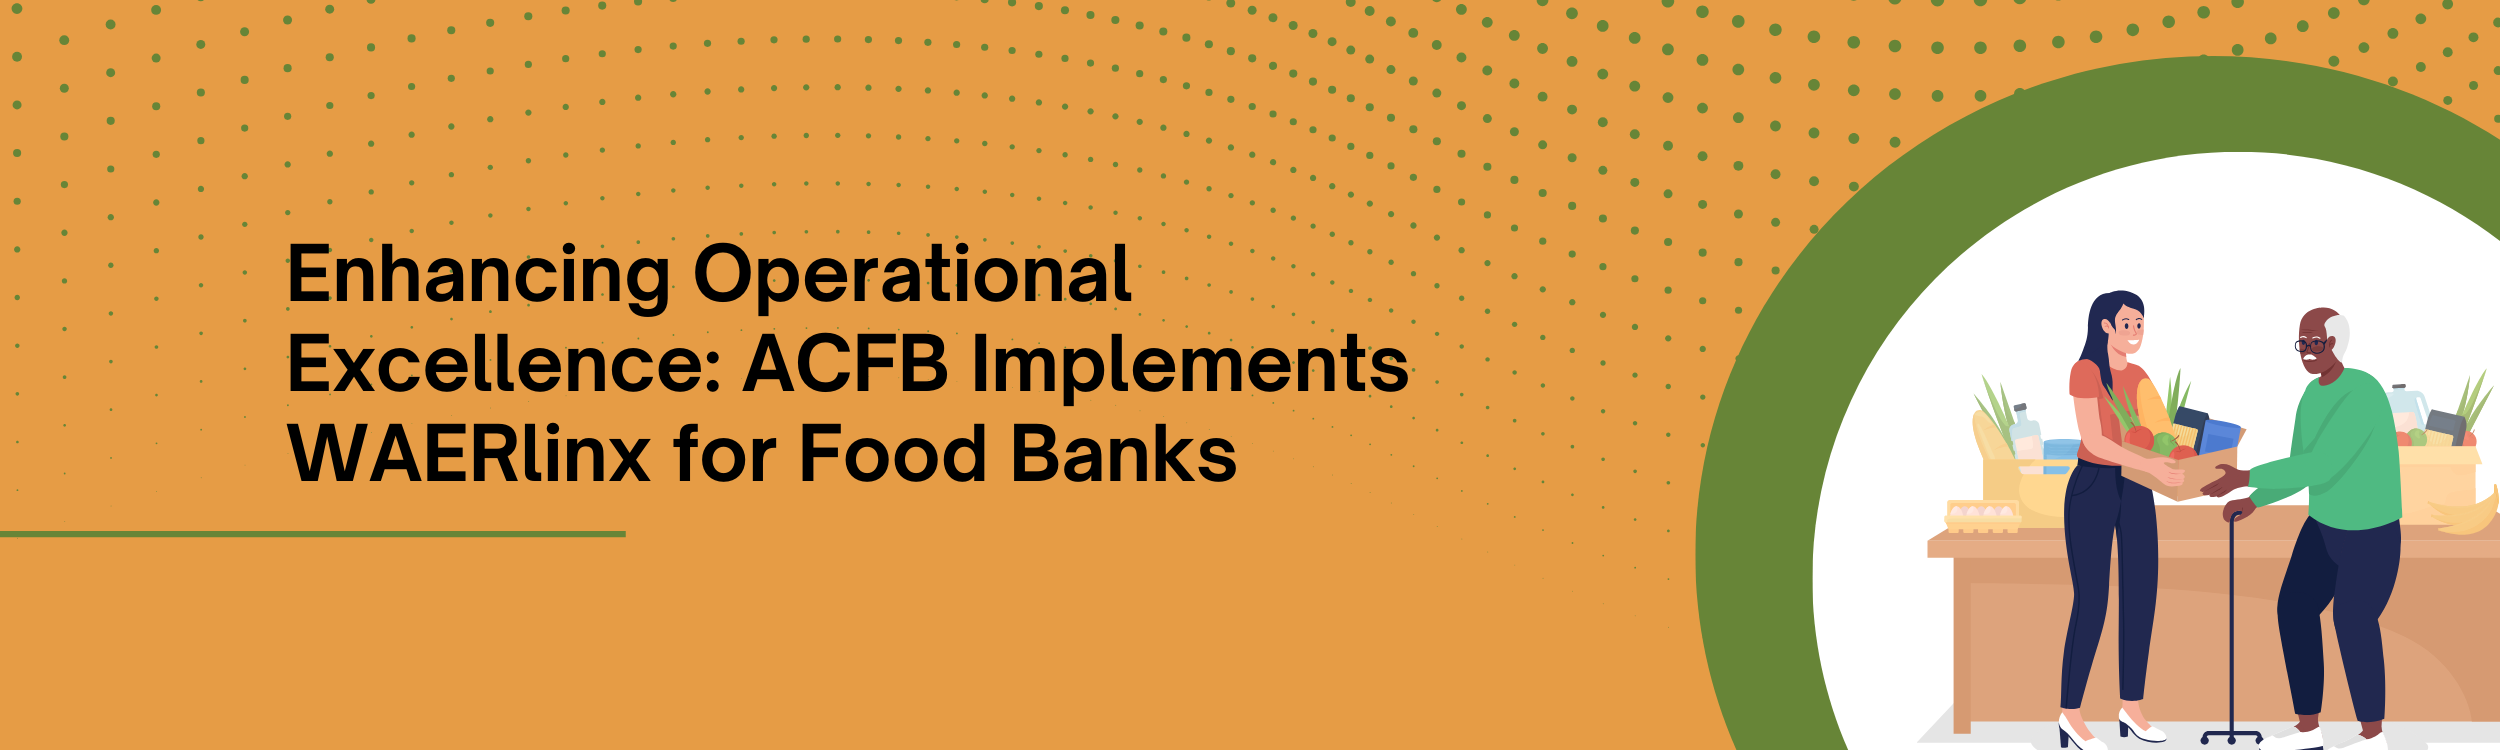 Enhancing Operational Excellence: ACFB Implements WAERlinx for Food Banks